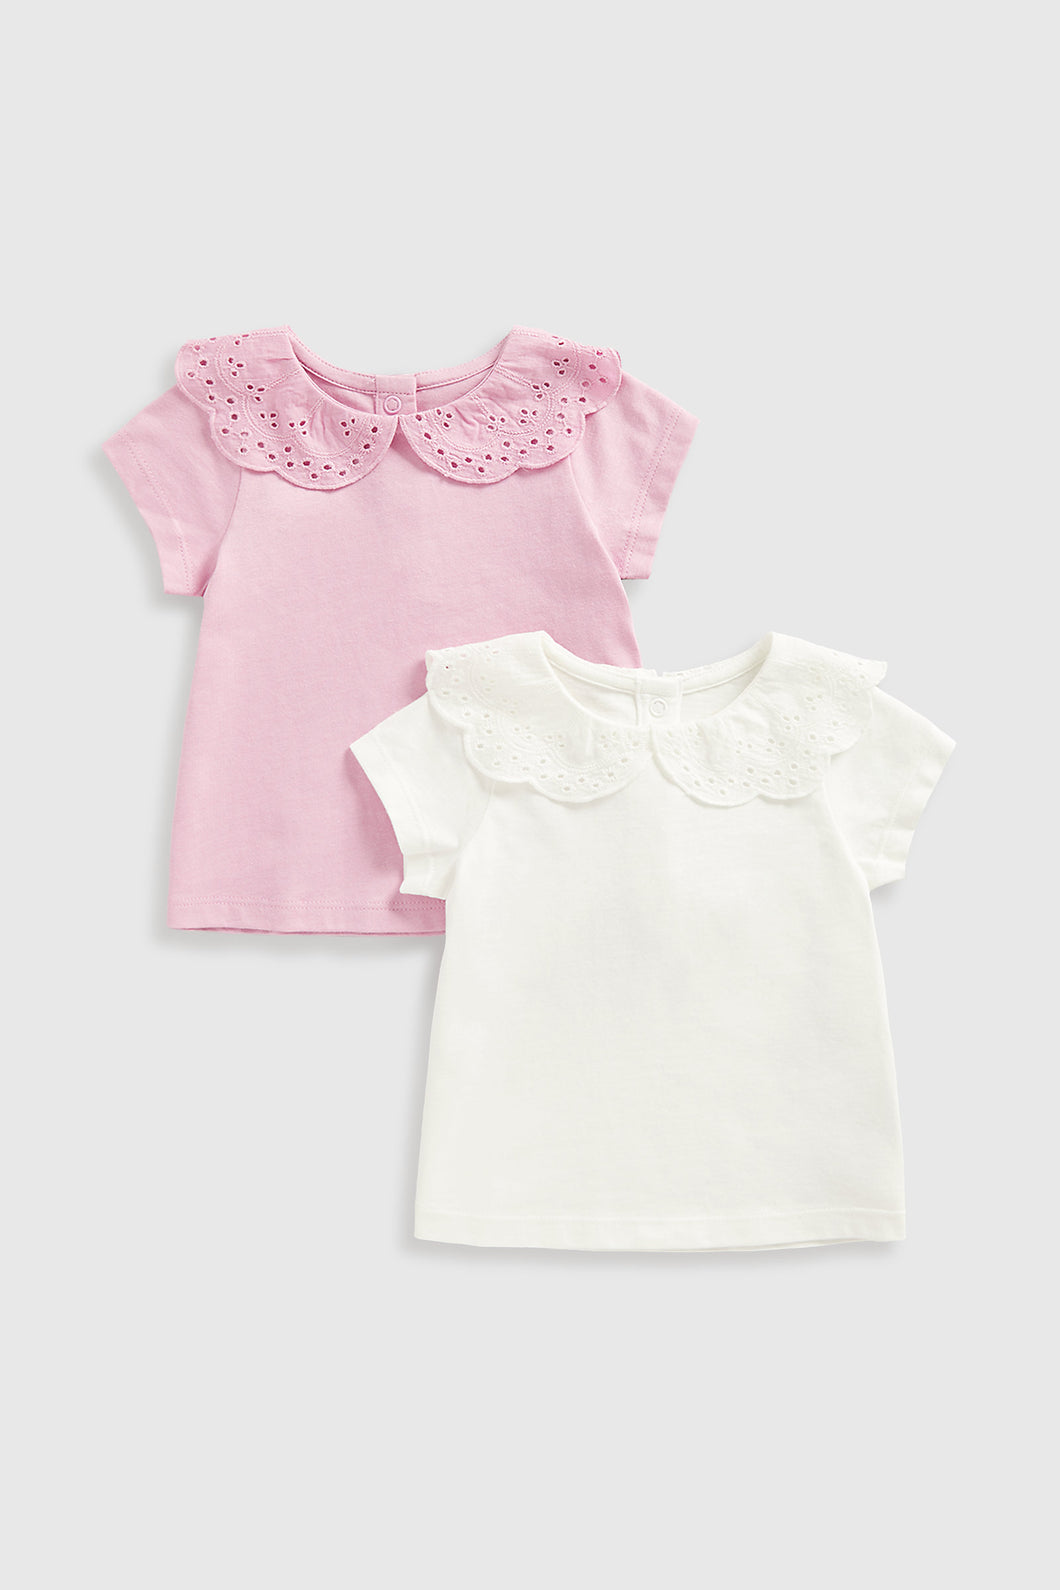 Mothercare Broderie Collar T-Shirts - 2 Pack